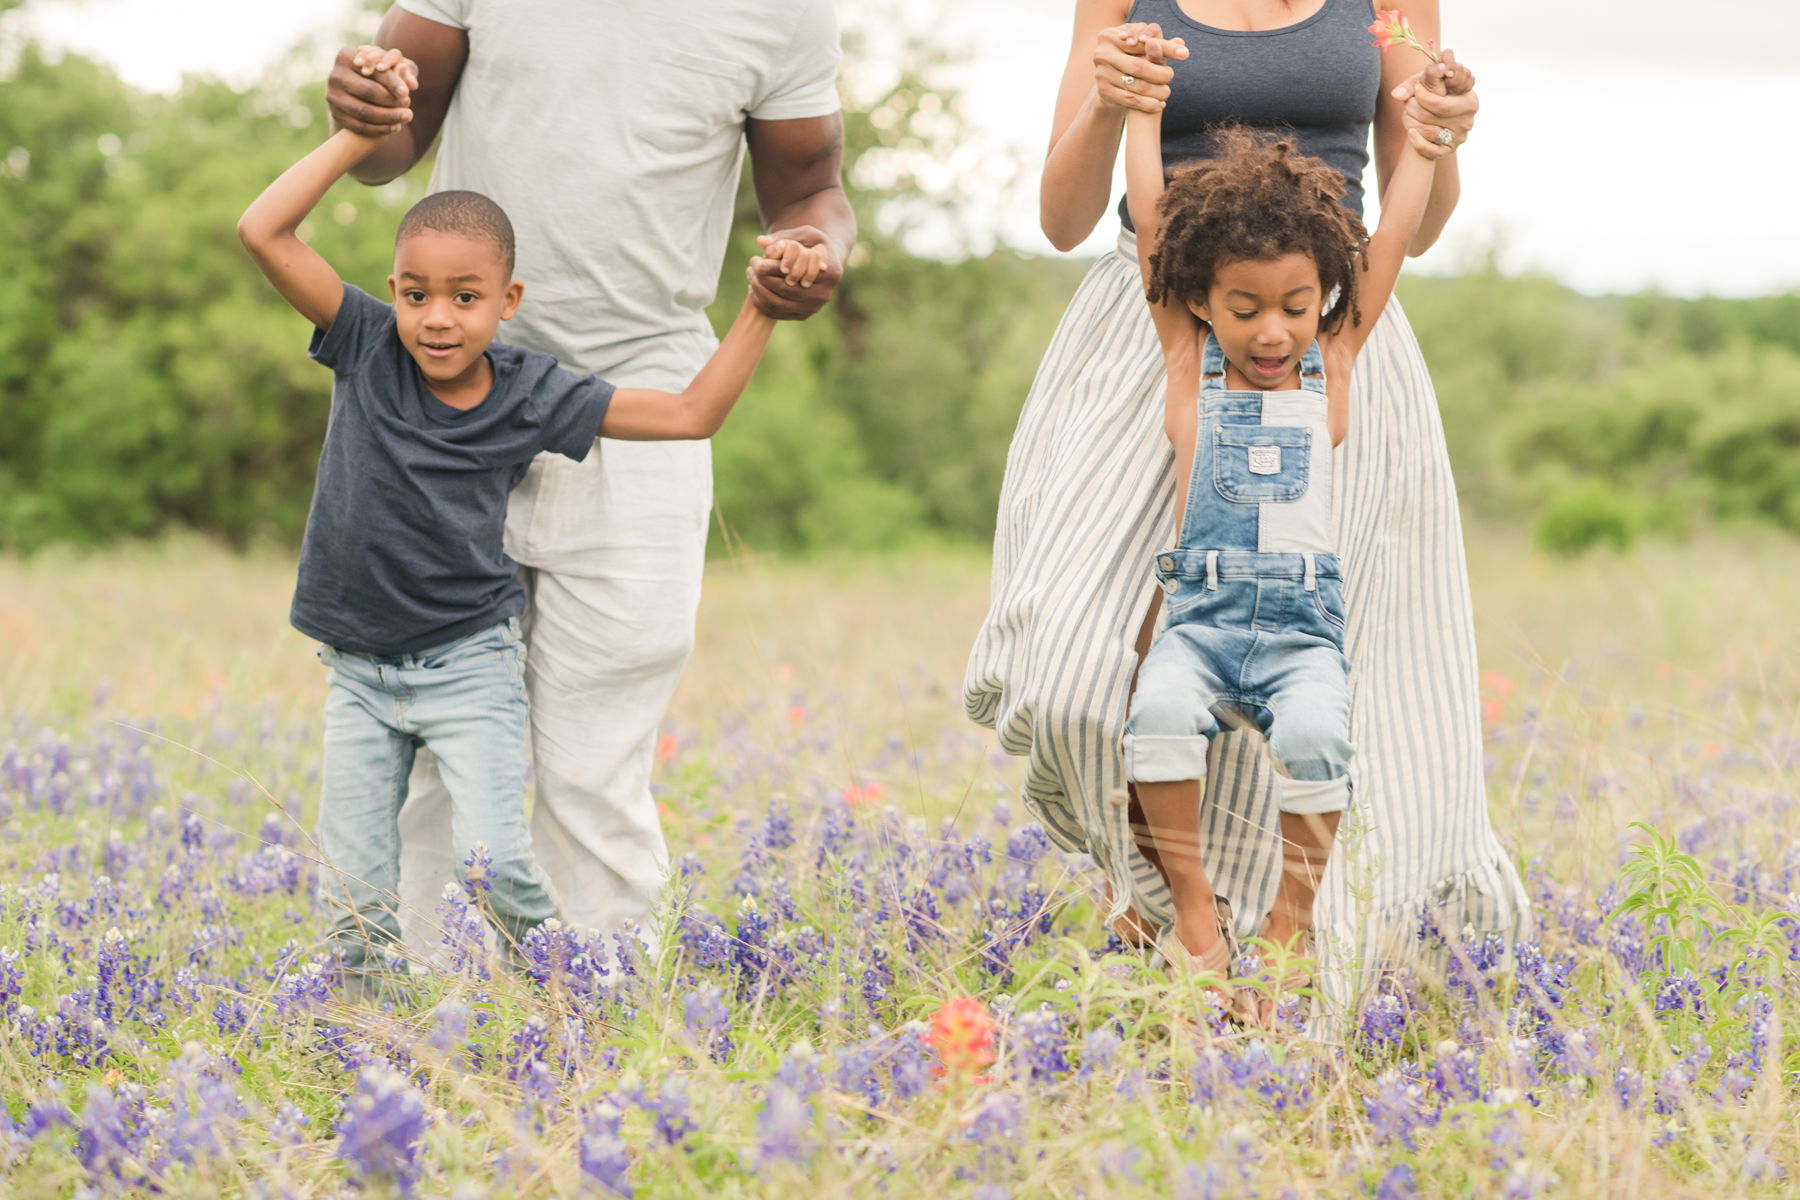 kids-playing-with-parents-dripping-springs-field-wildflowers-austin-family-photography